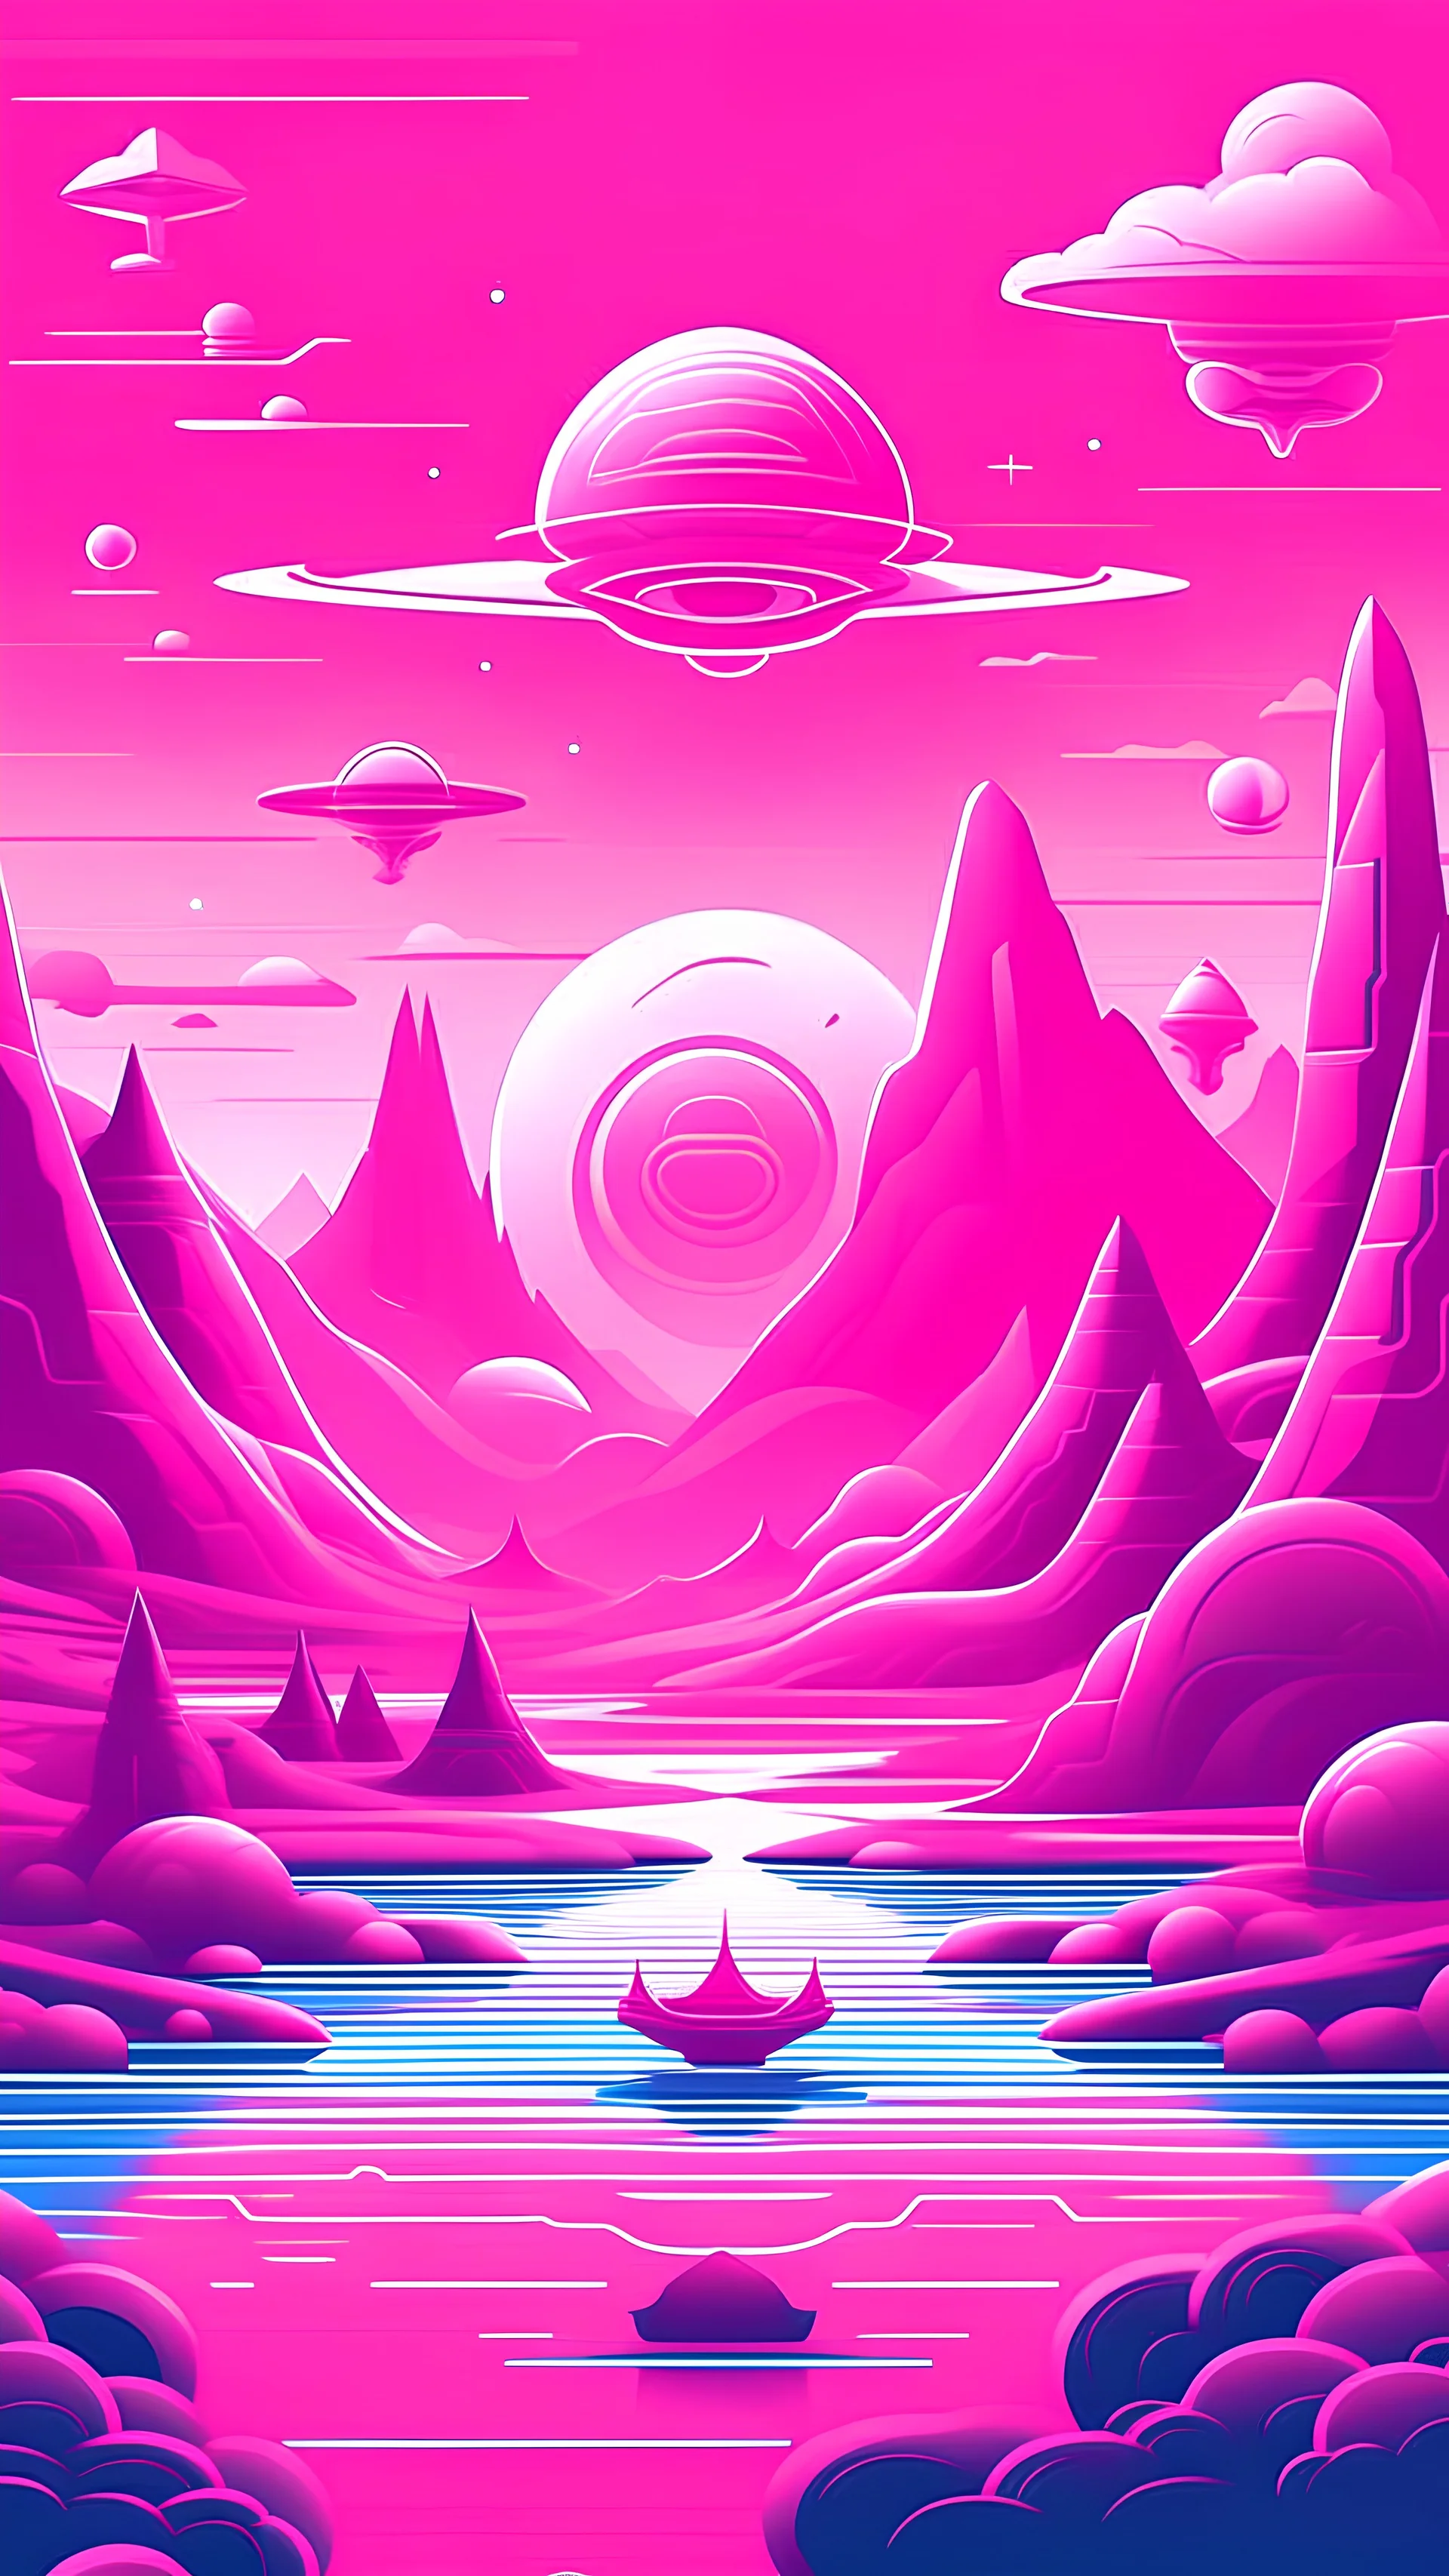 a pink banner with a logo of an alien civilization